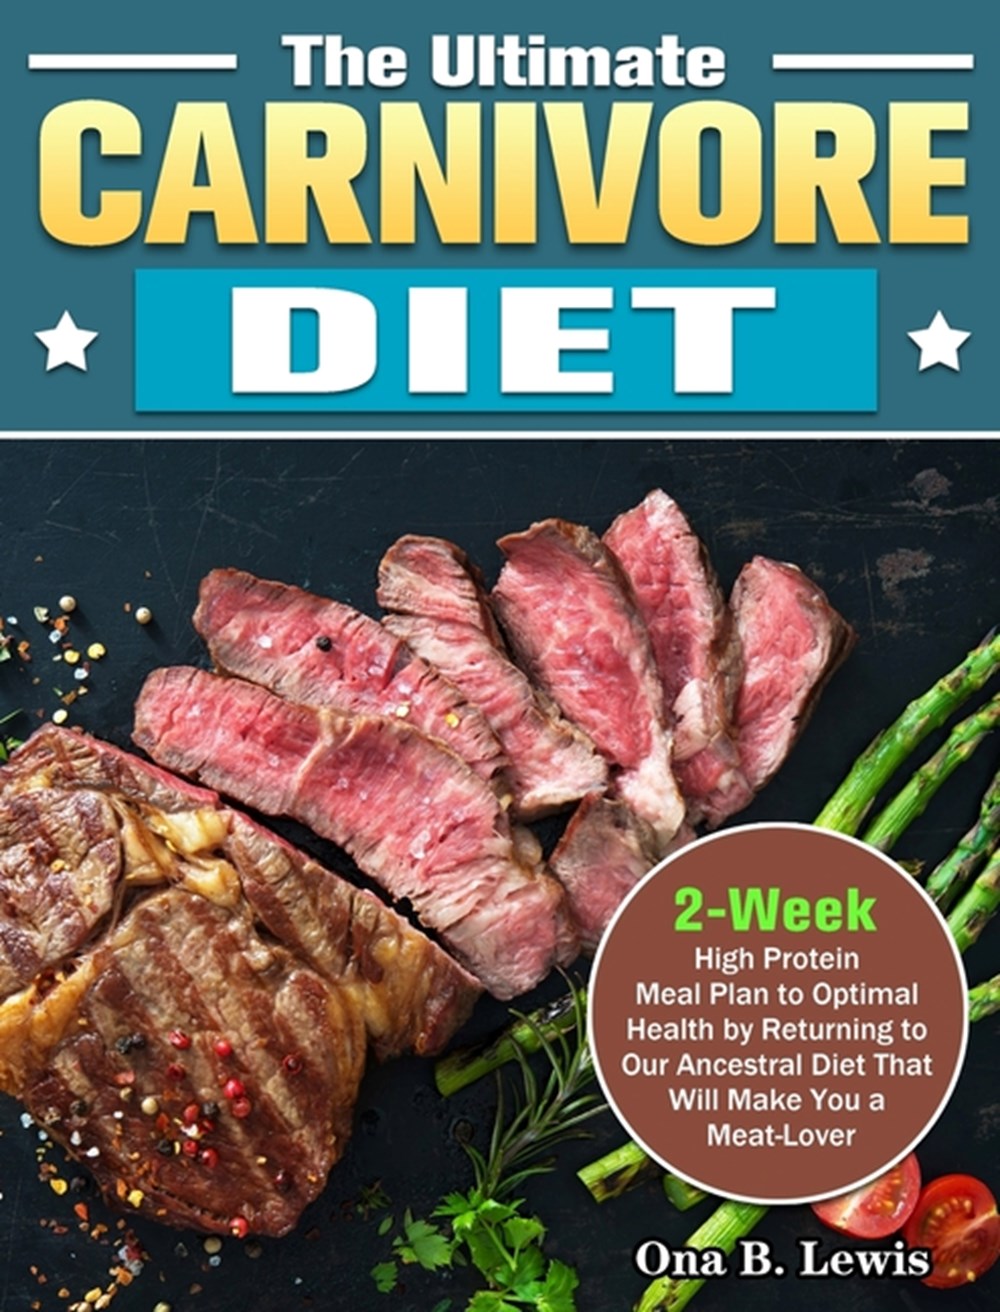 Ultimate Carnivore Diet 2-Week High Protein Meal Plan to Optimal Health by Returning to Our Ancestra